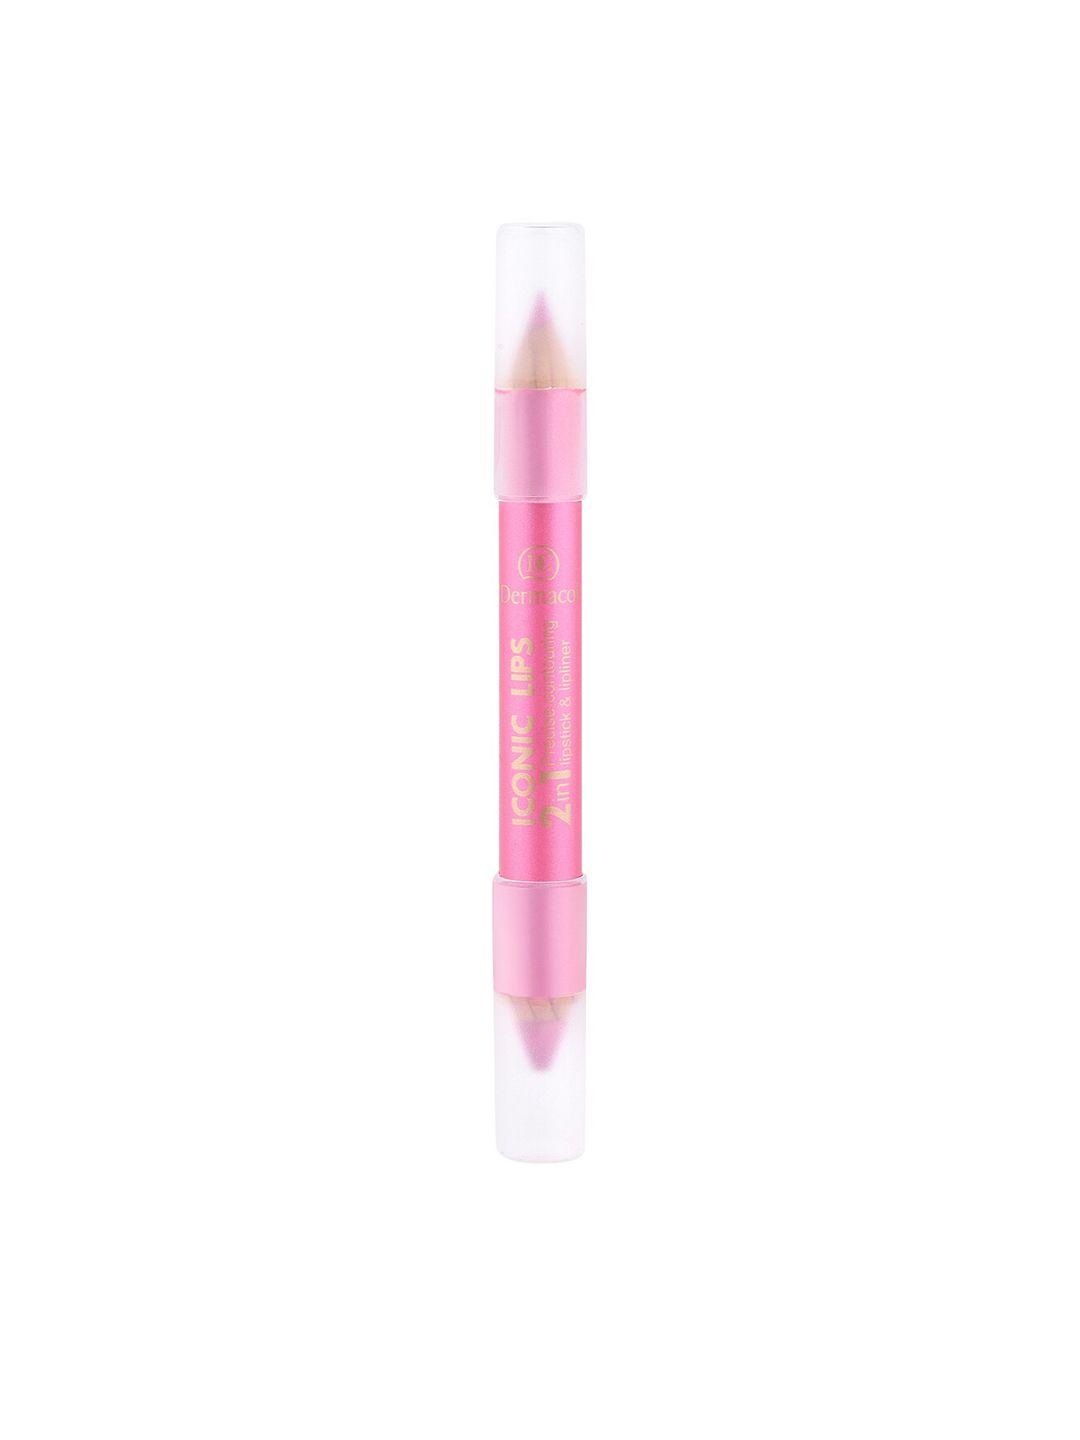 dermacol iconic lips 2 in 1 lip liner & lipstick  - 02